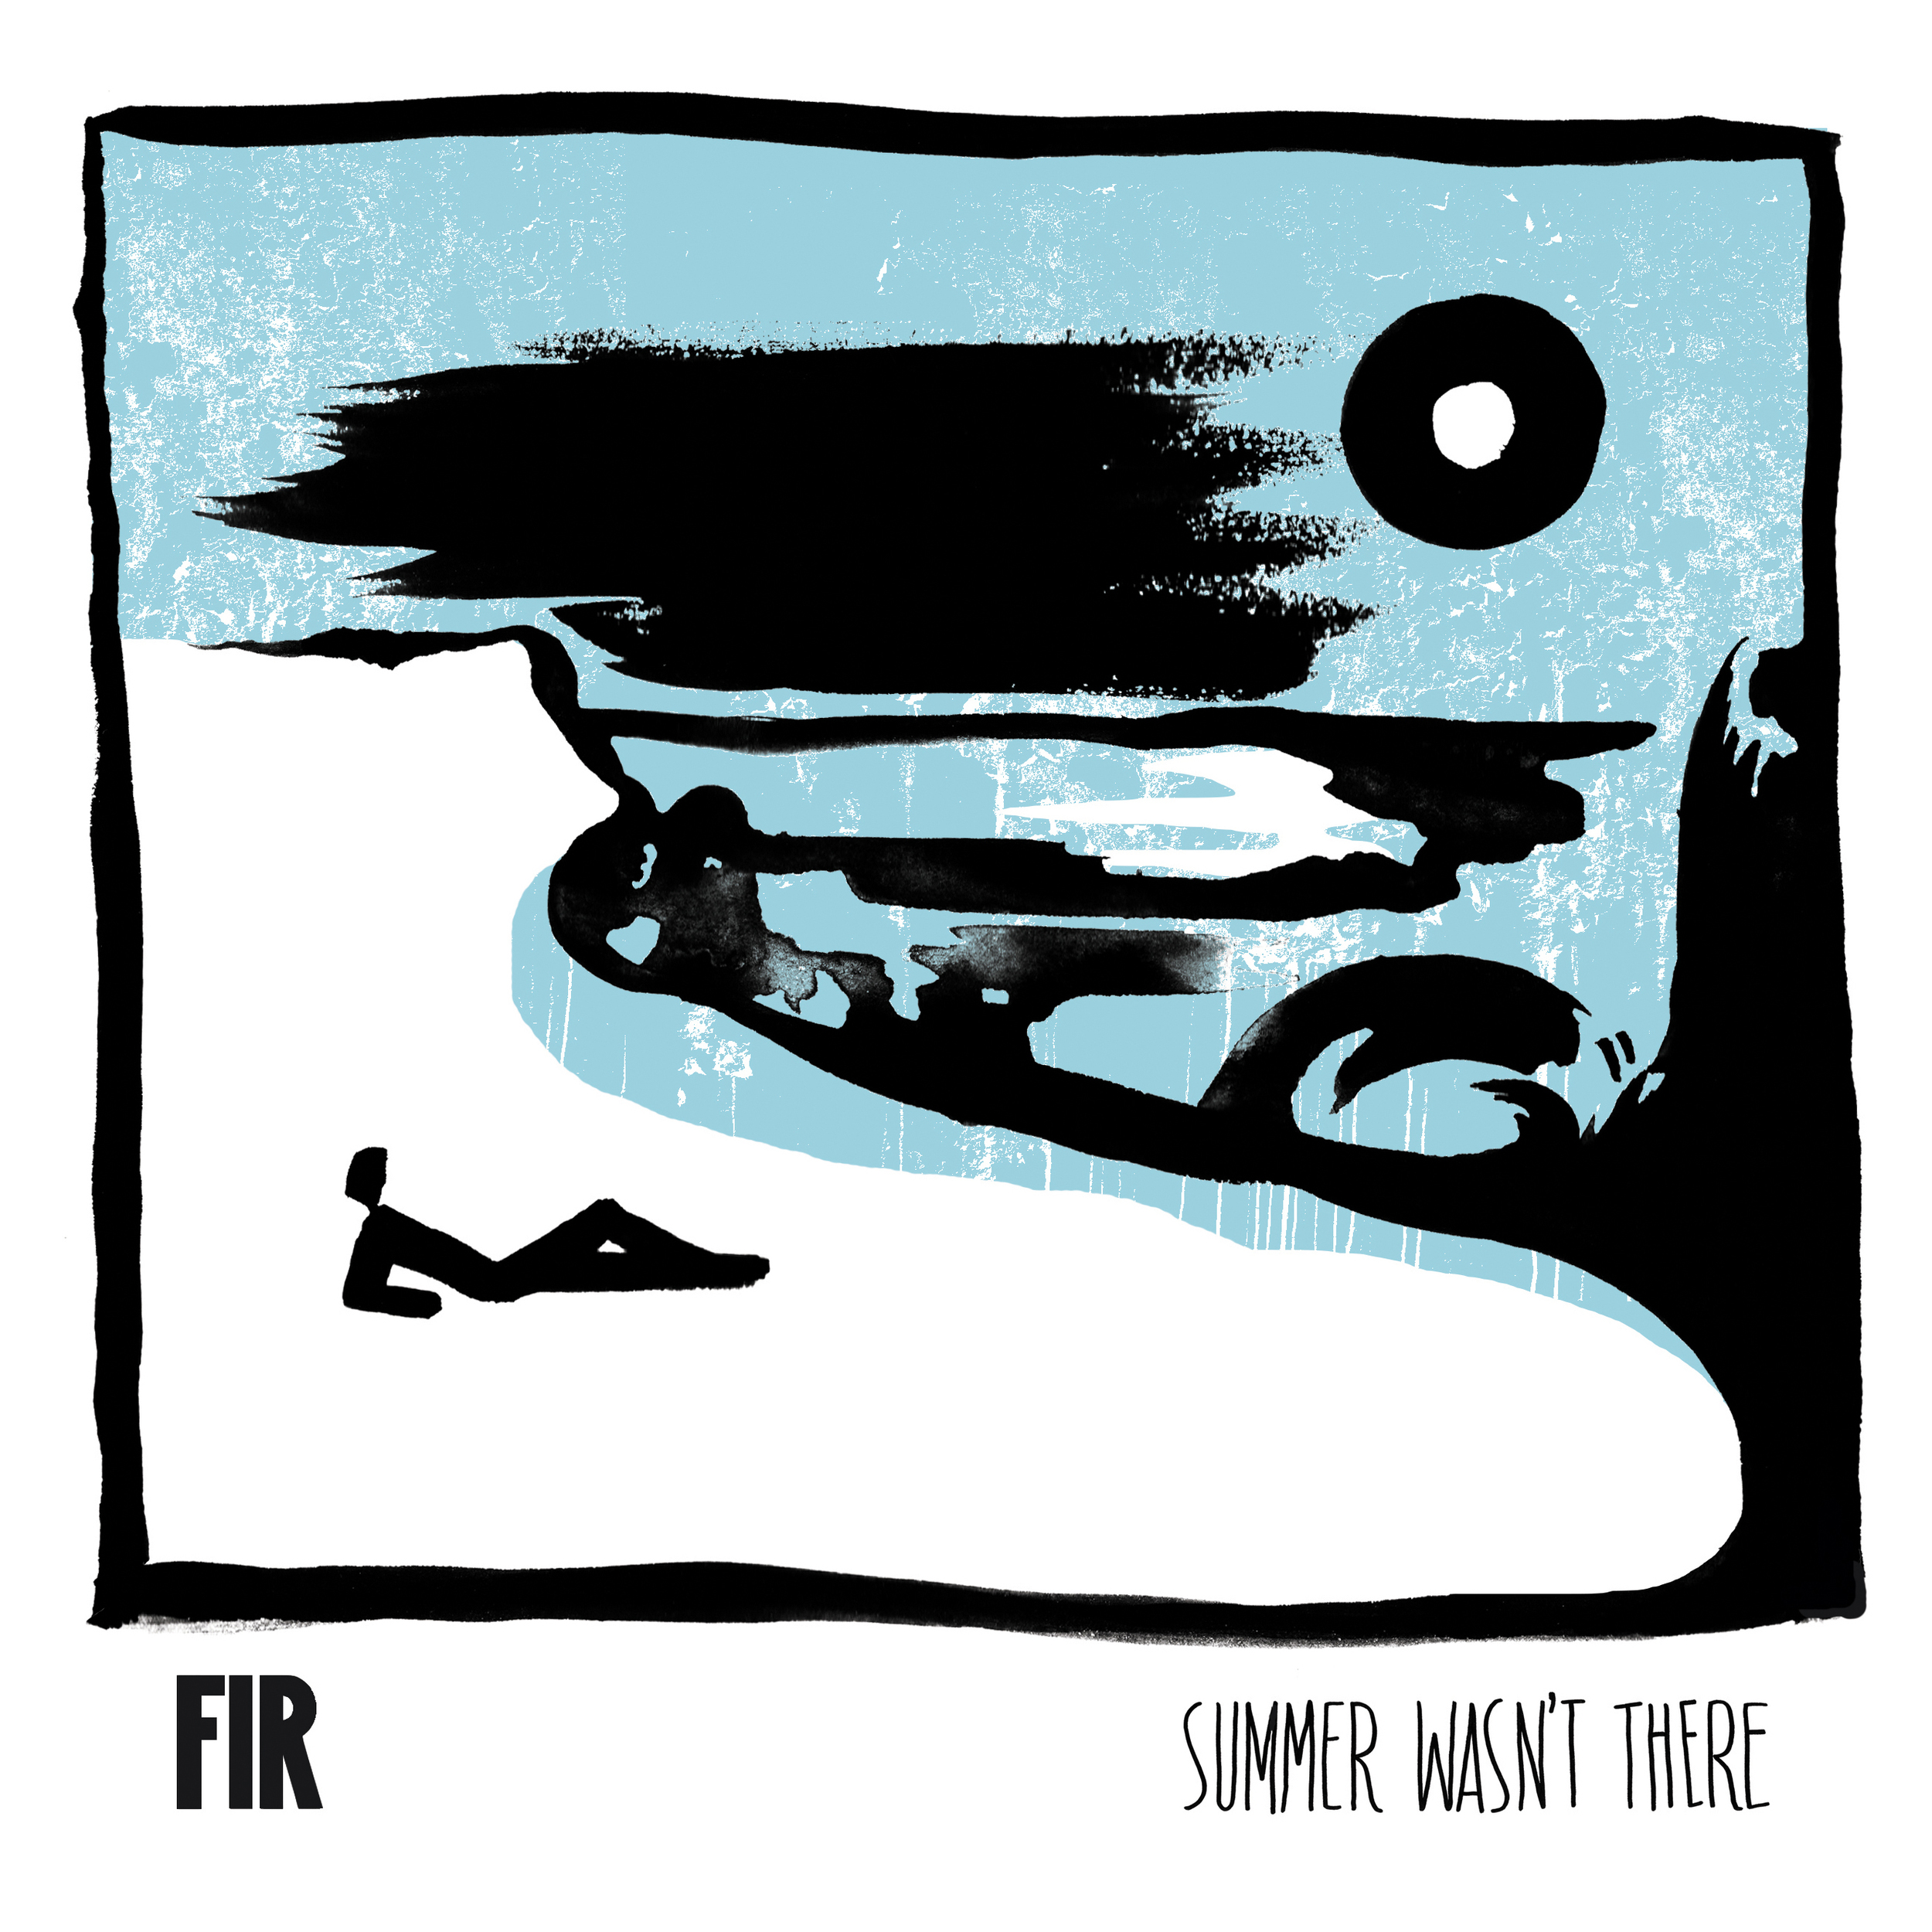 "Summer Wasn't There" by Fir